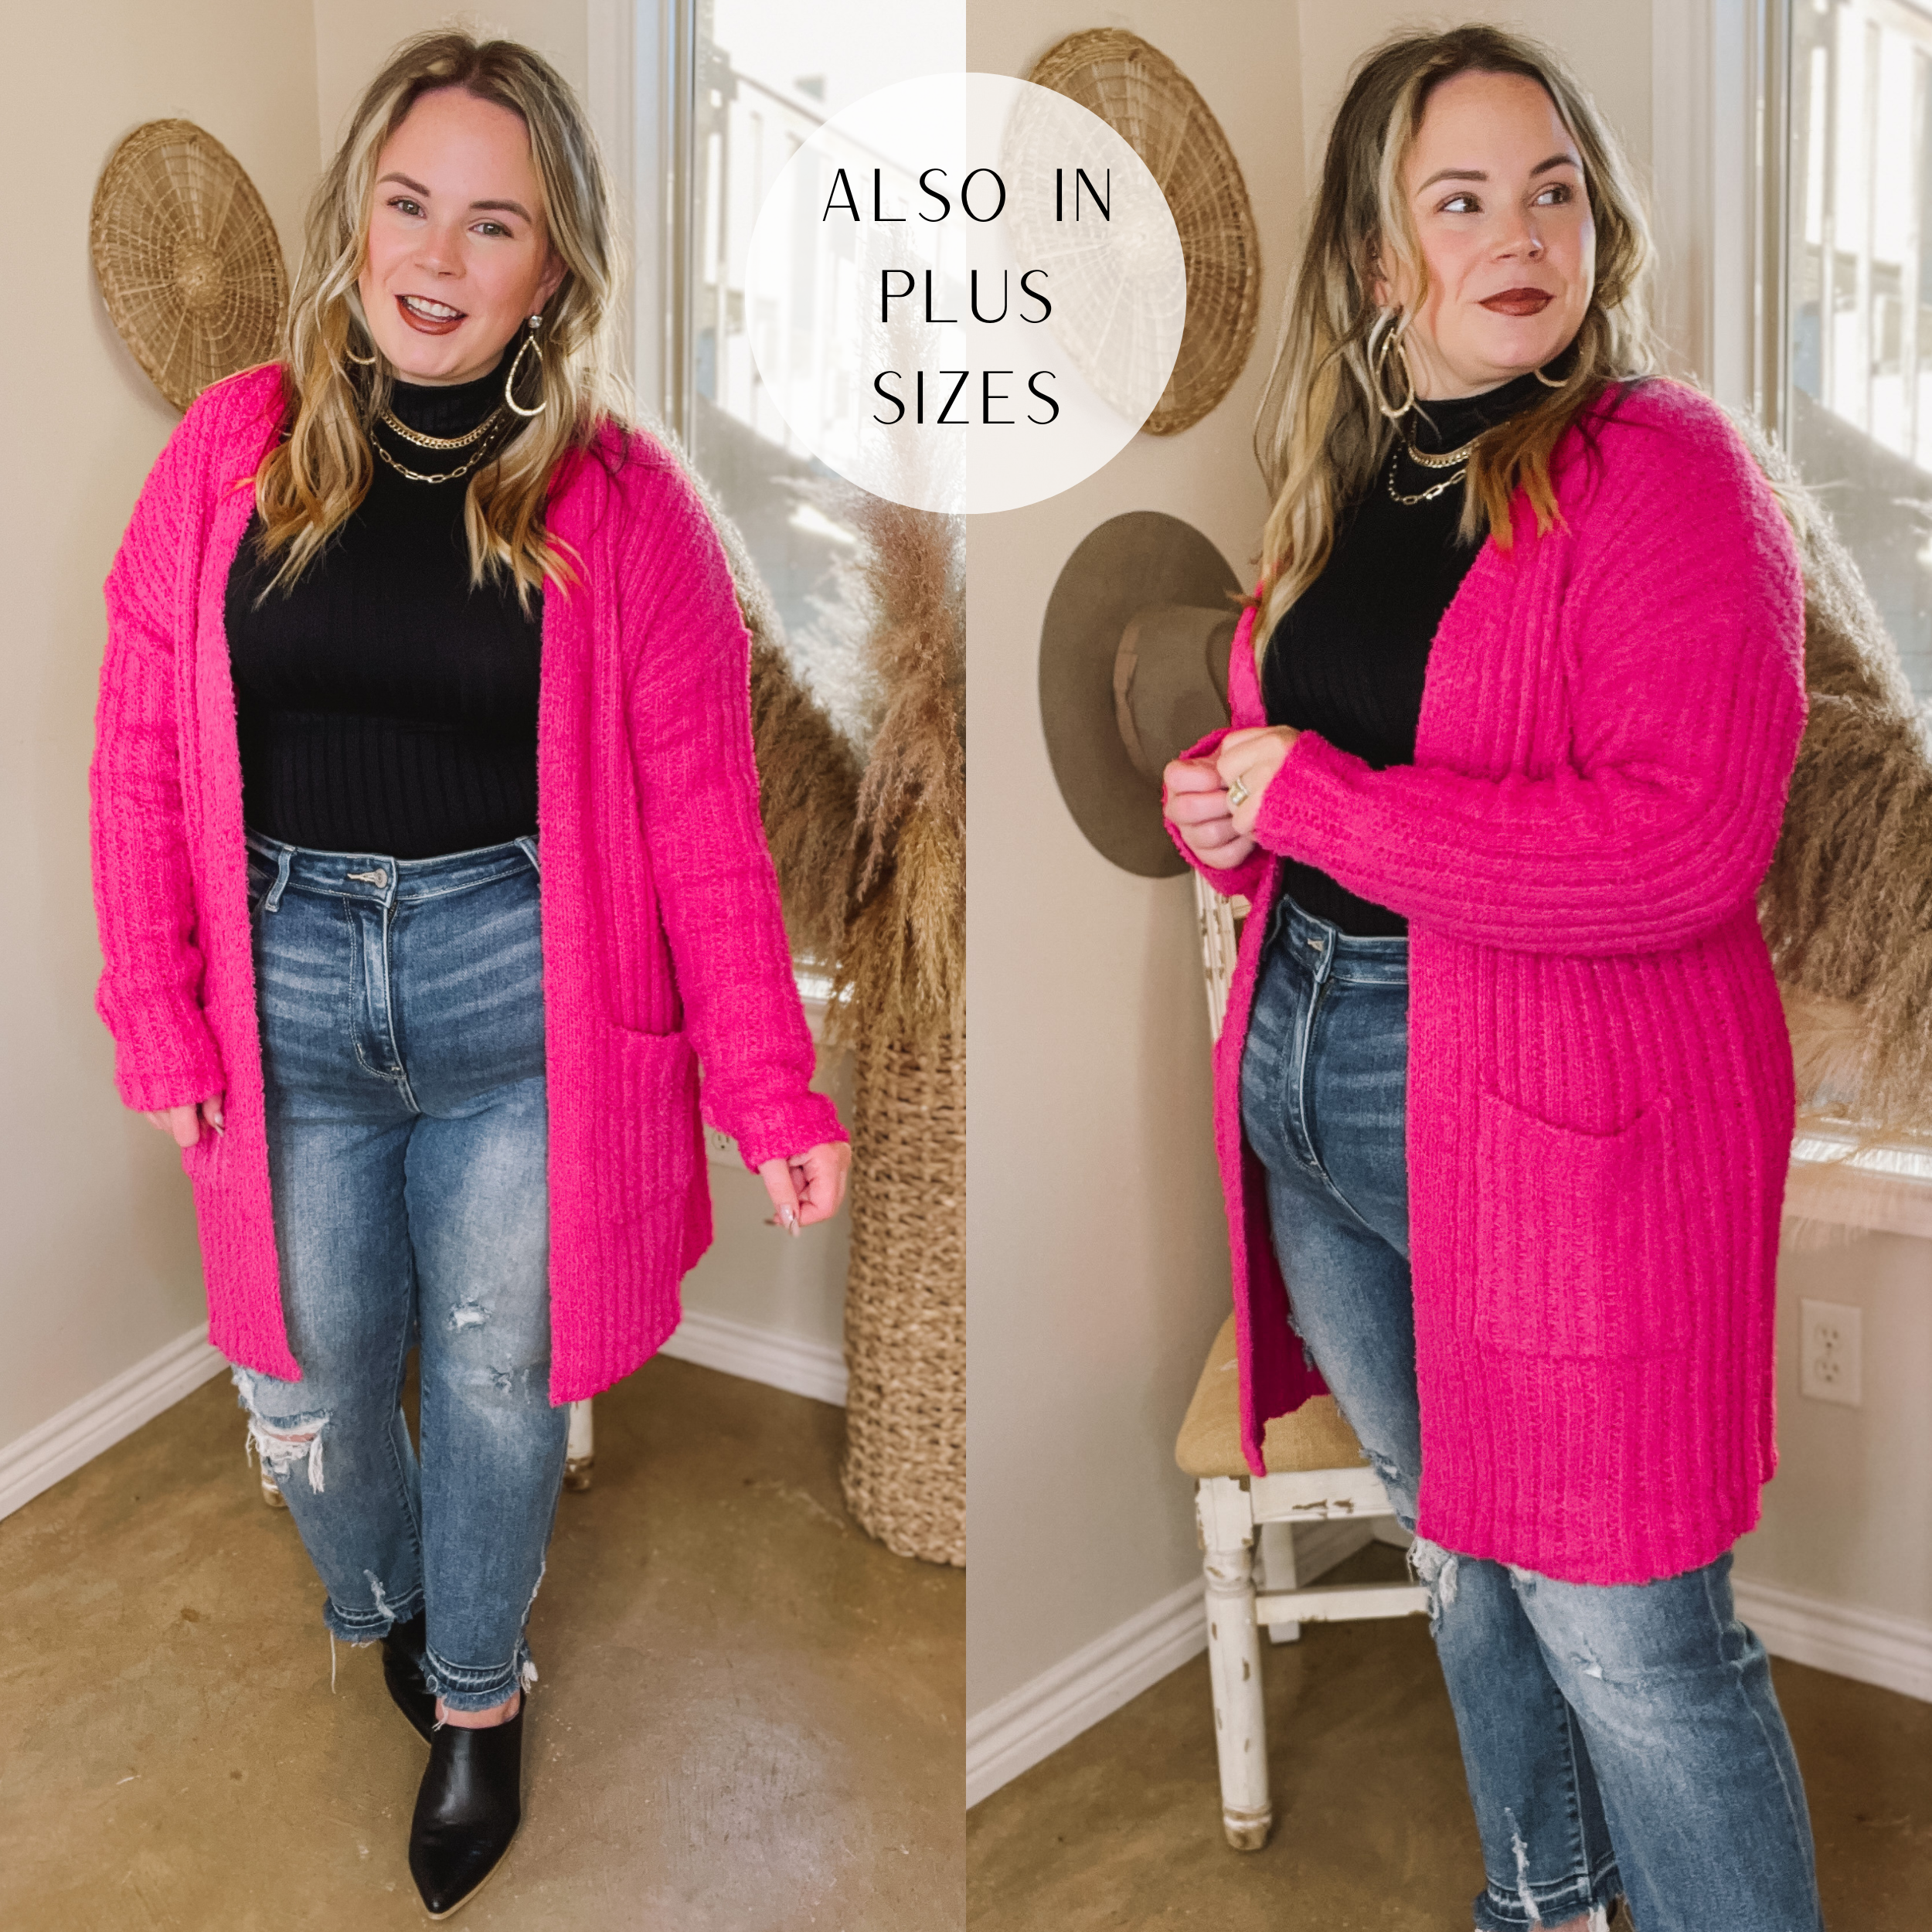 Model is wearing a black undershirt with a hot pink long sleeve cardigan. Model has this paired with skinny, ankle jeans, black mules, and gold jewelry. Background is hues of white and brown.